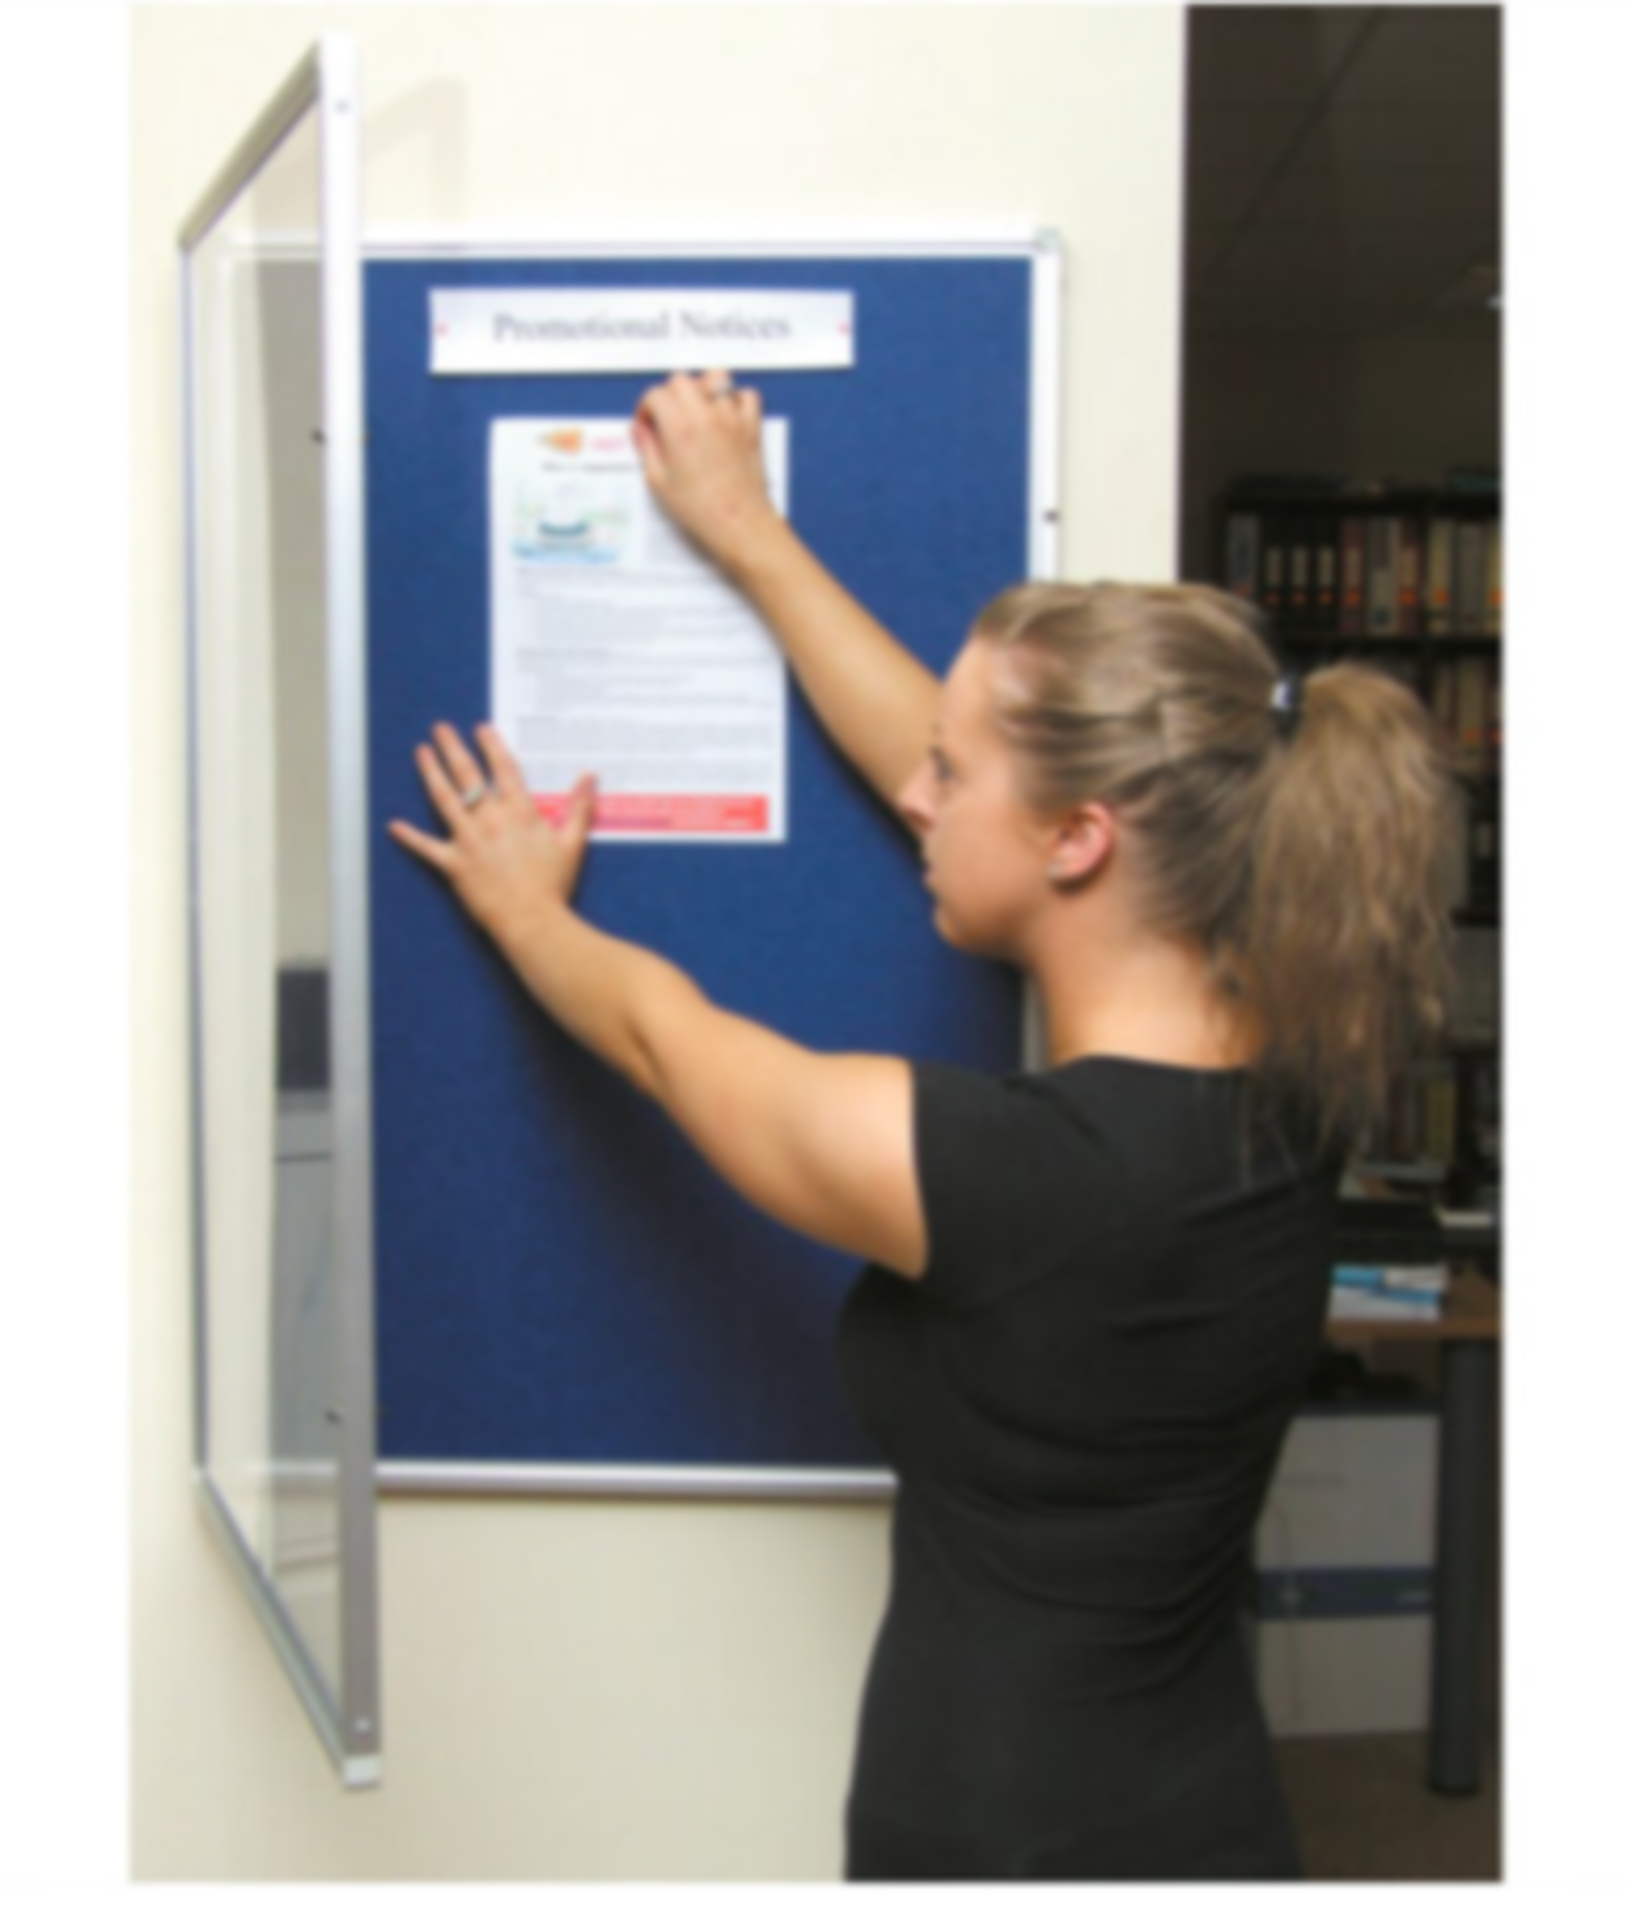 11x OFFIS NOTICEBOARD SHOW CASE RED WITH ALUMINIUM TRIM - OFI8360410K, NEW SEALED RRP £880